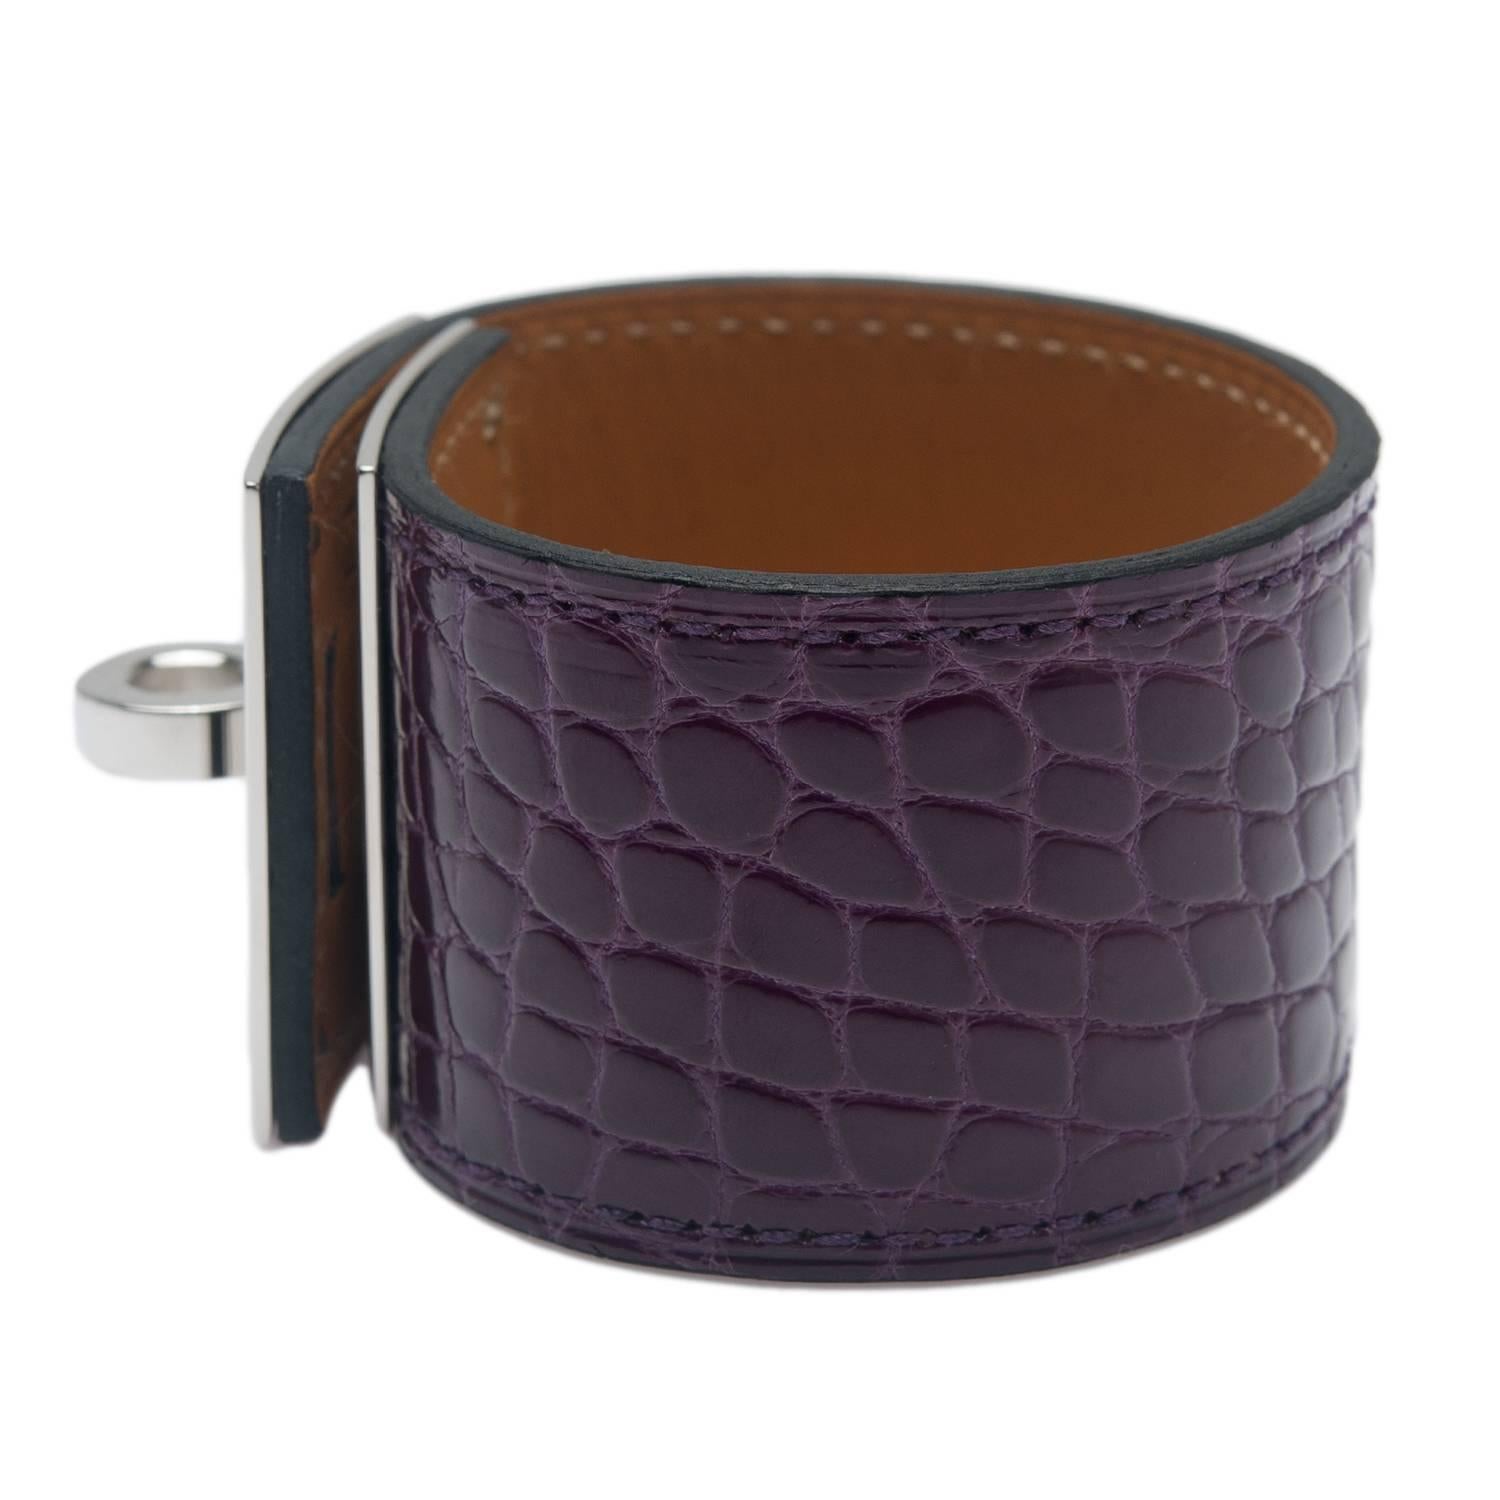 Hermes Kelly Dog Bracelet in Amethyst shiny alligator with palladium and silver plated hardware.

This adjustable cuff features a front palladium plated plate with three slots and the signature Kelly toggle closure.

Origin: France

Condition: